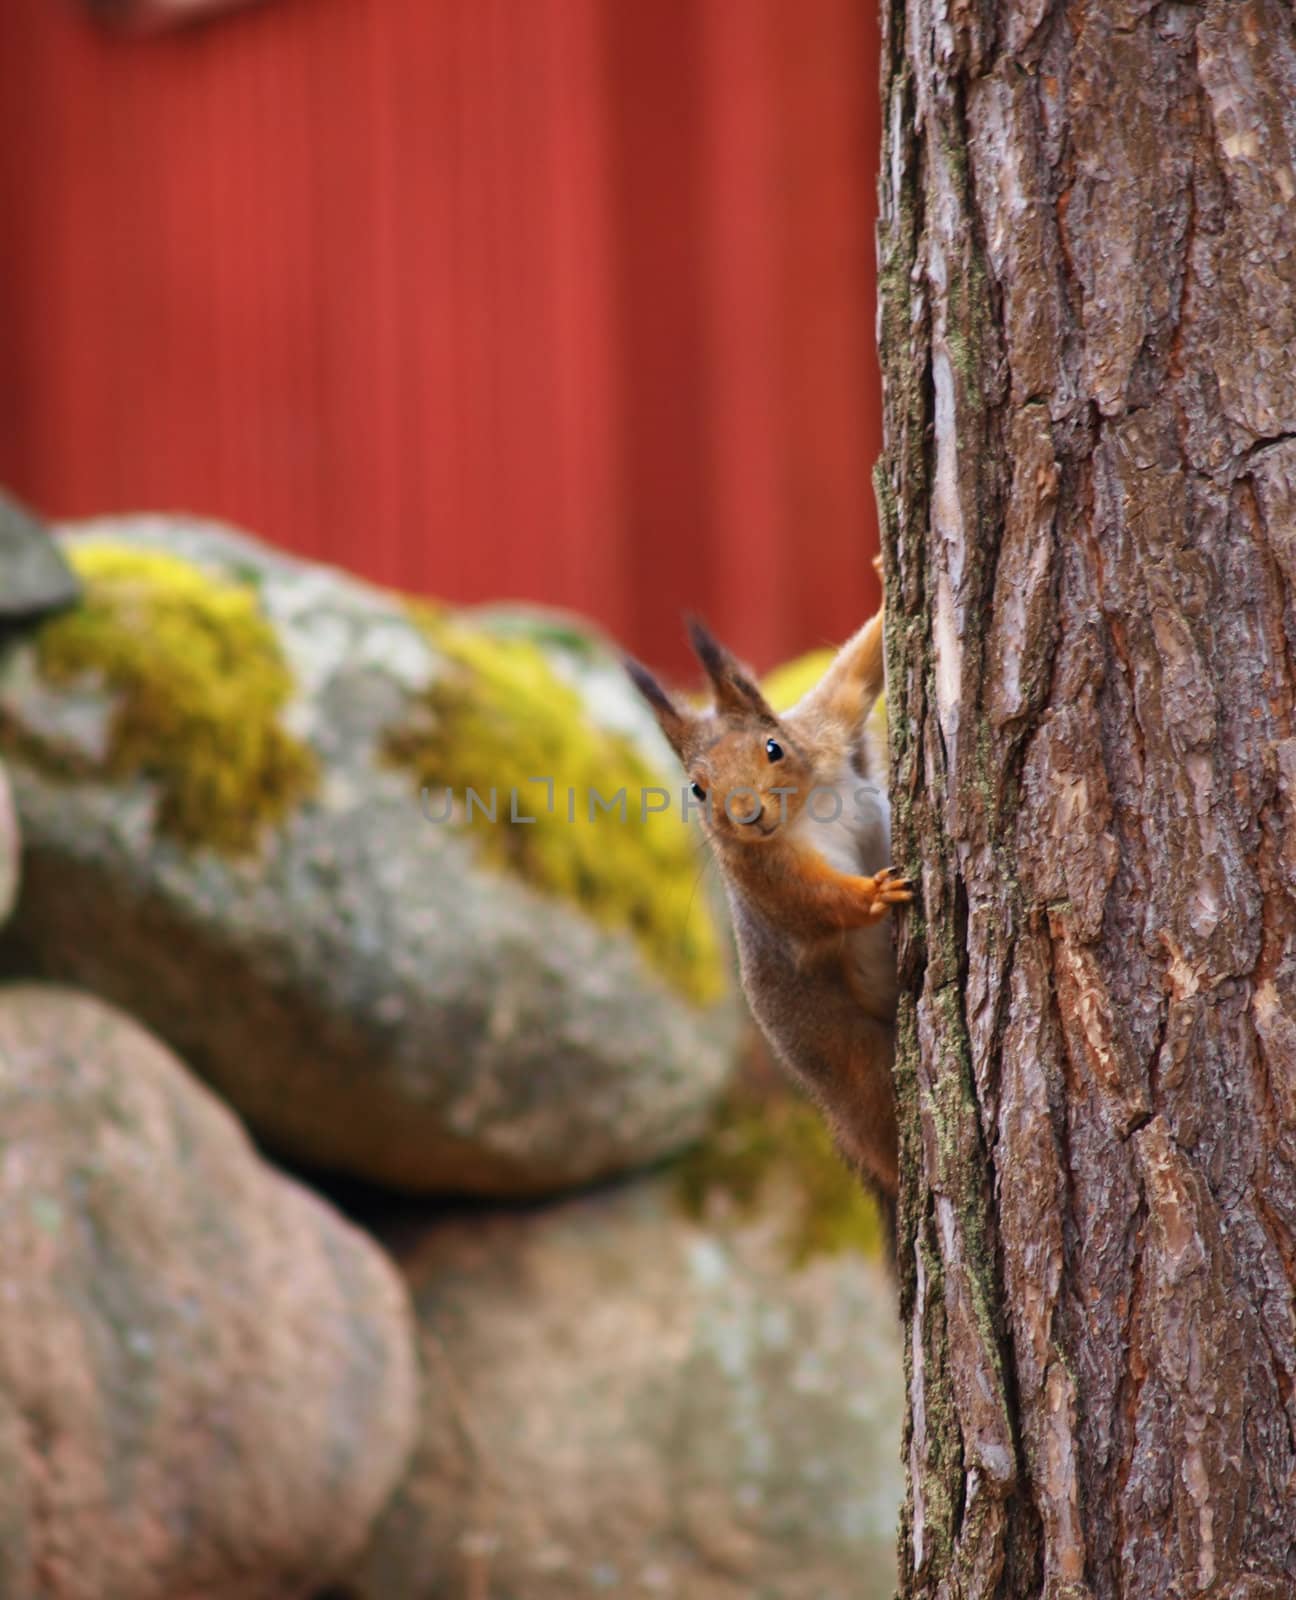 Squirrel on a tree stem, watching out for predators